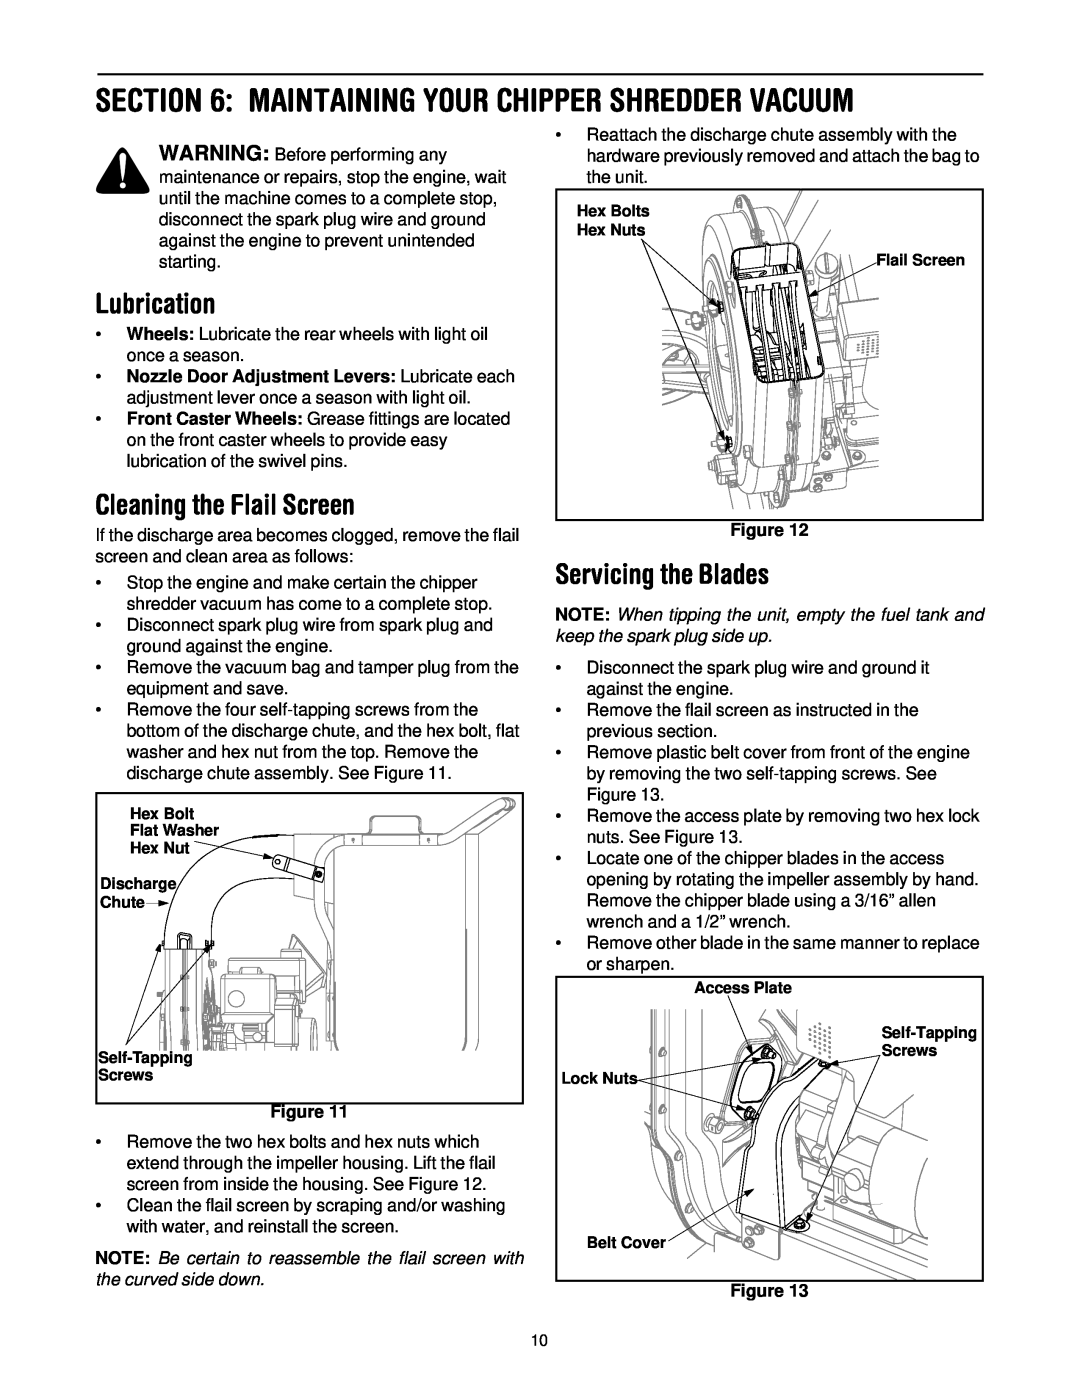 Troy-Bilt CSV206 manual Lubrication, Cleaning the Flail Screen, Servicing the Blades 